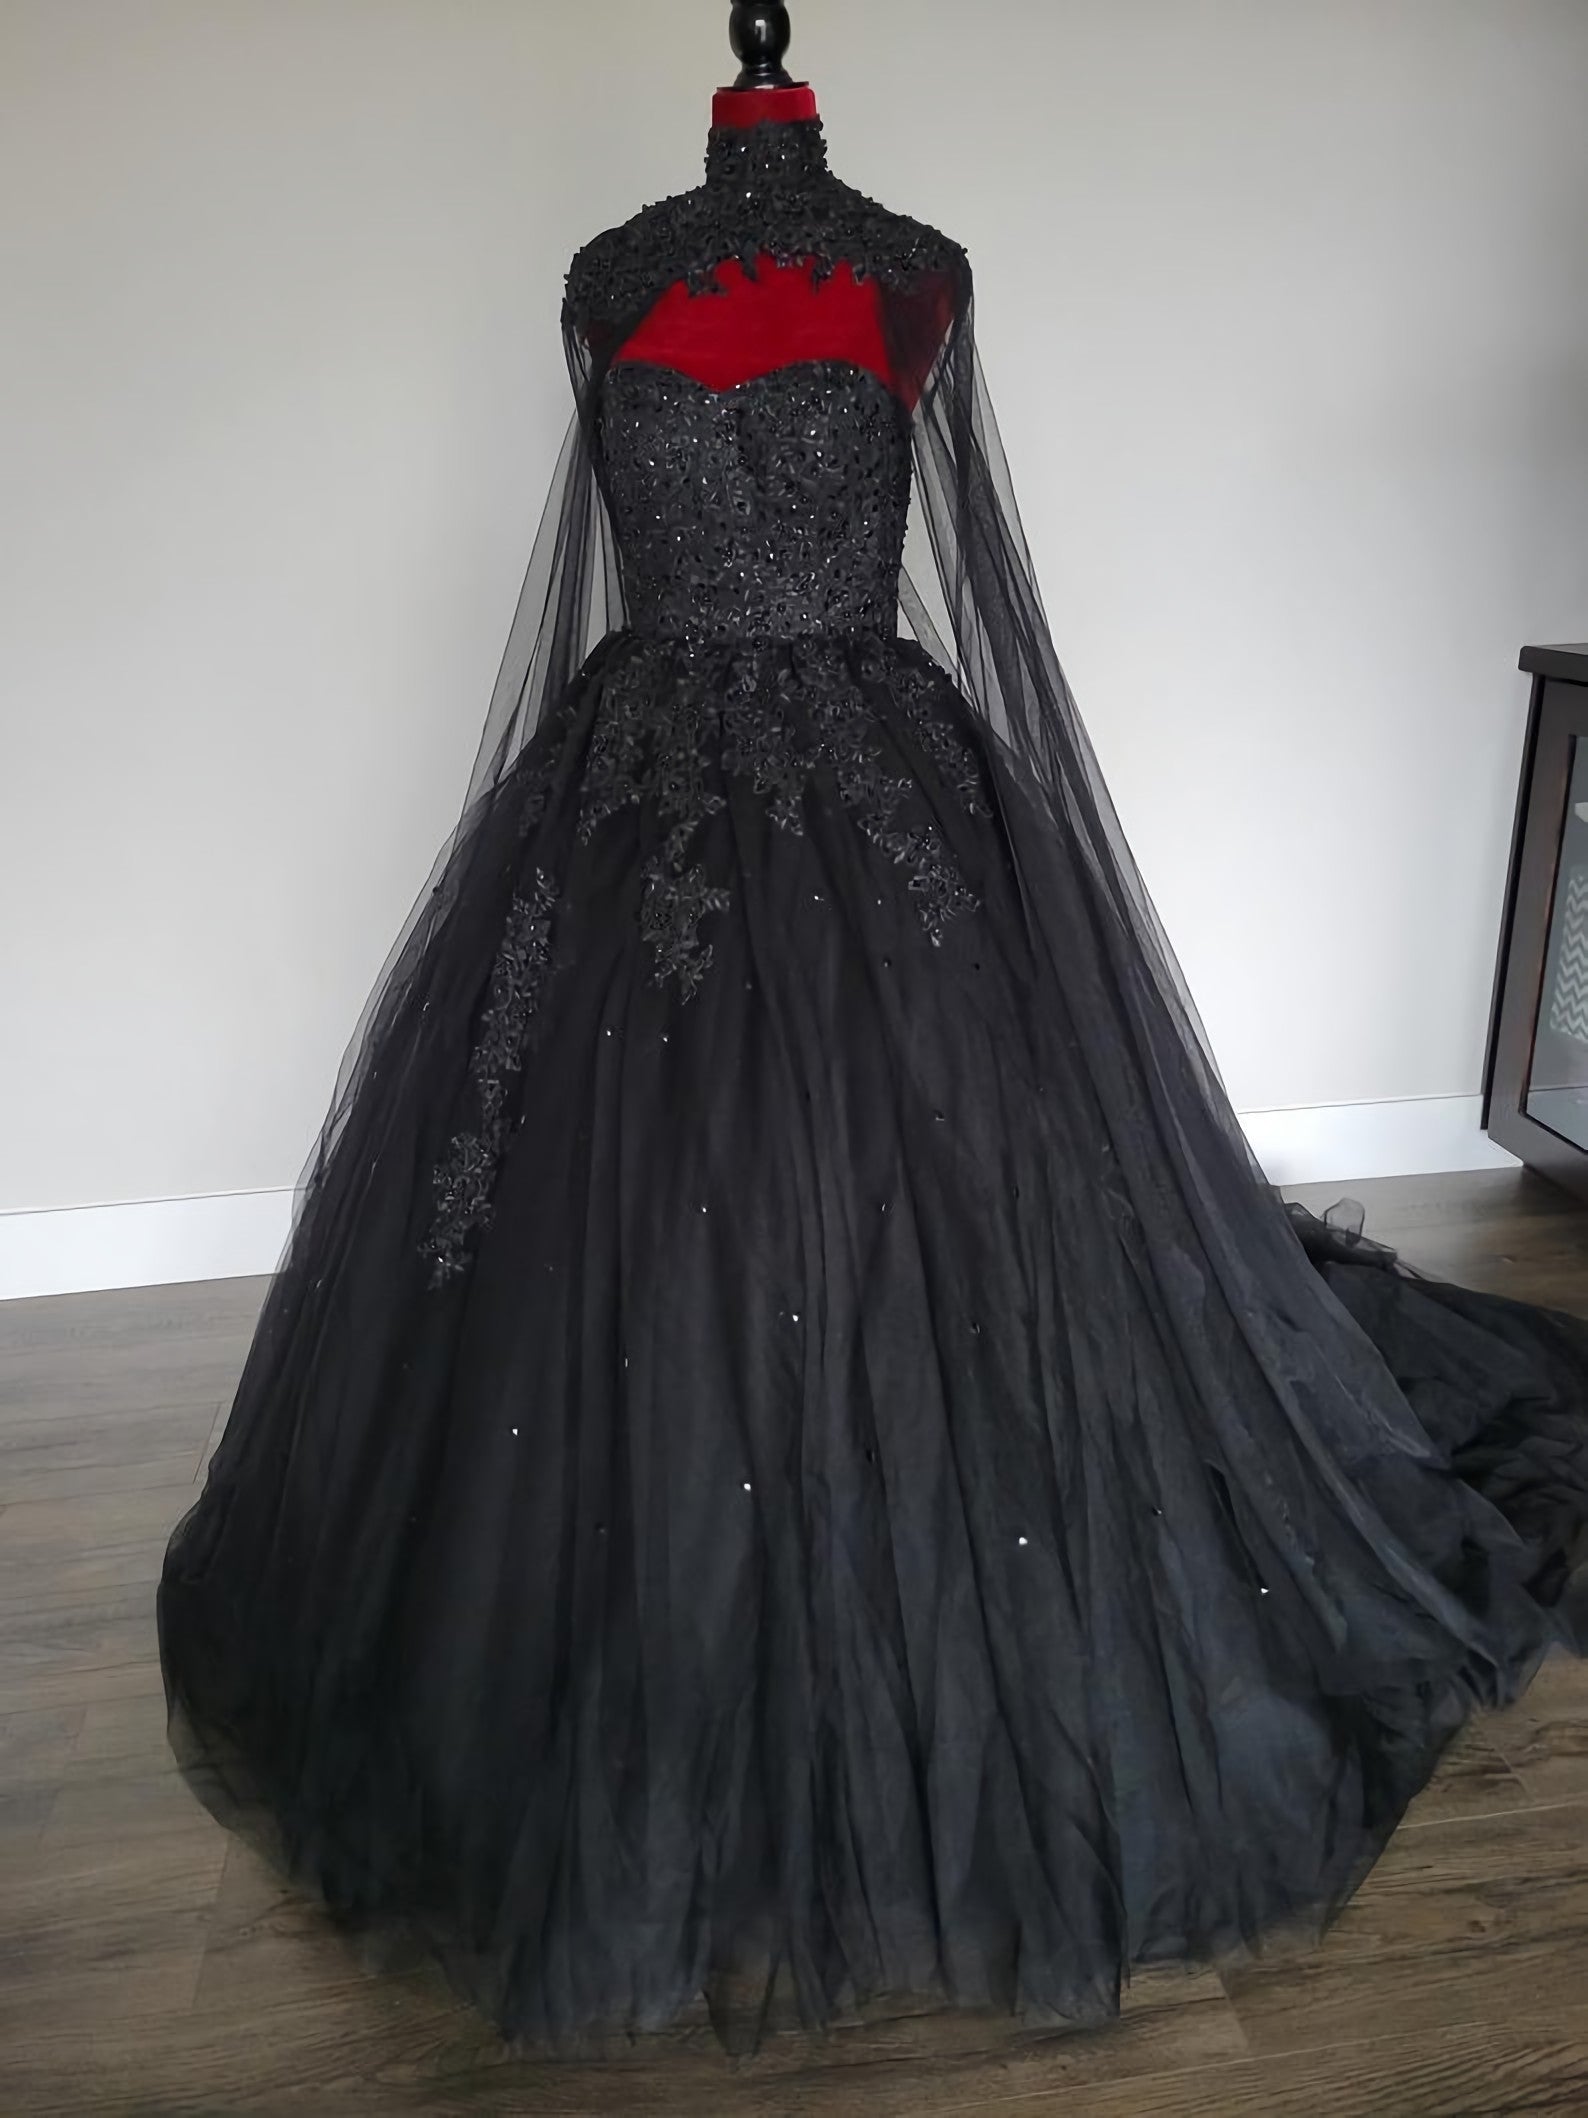 Wedding Dresses Websites, Black Full Ballgown With High Neck Veil Wedding Dress, Bridal Gown With Long Train Sleeveless Sweetheart Strapless